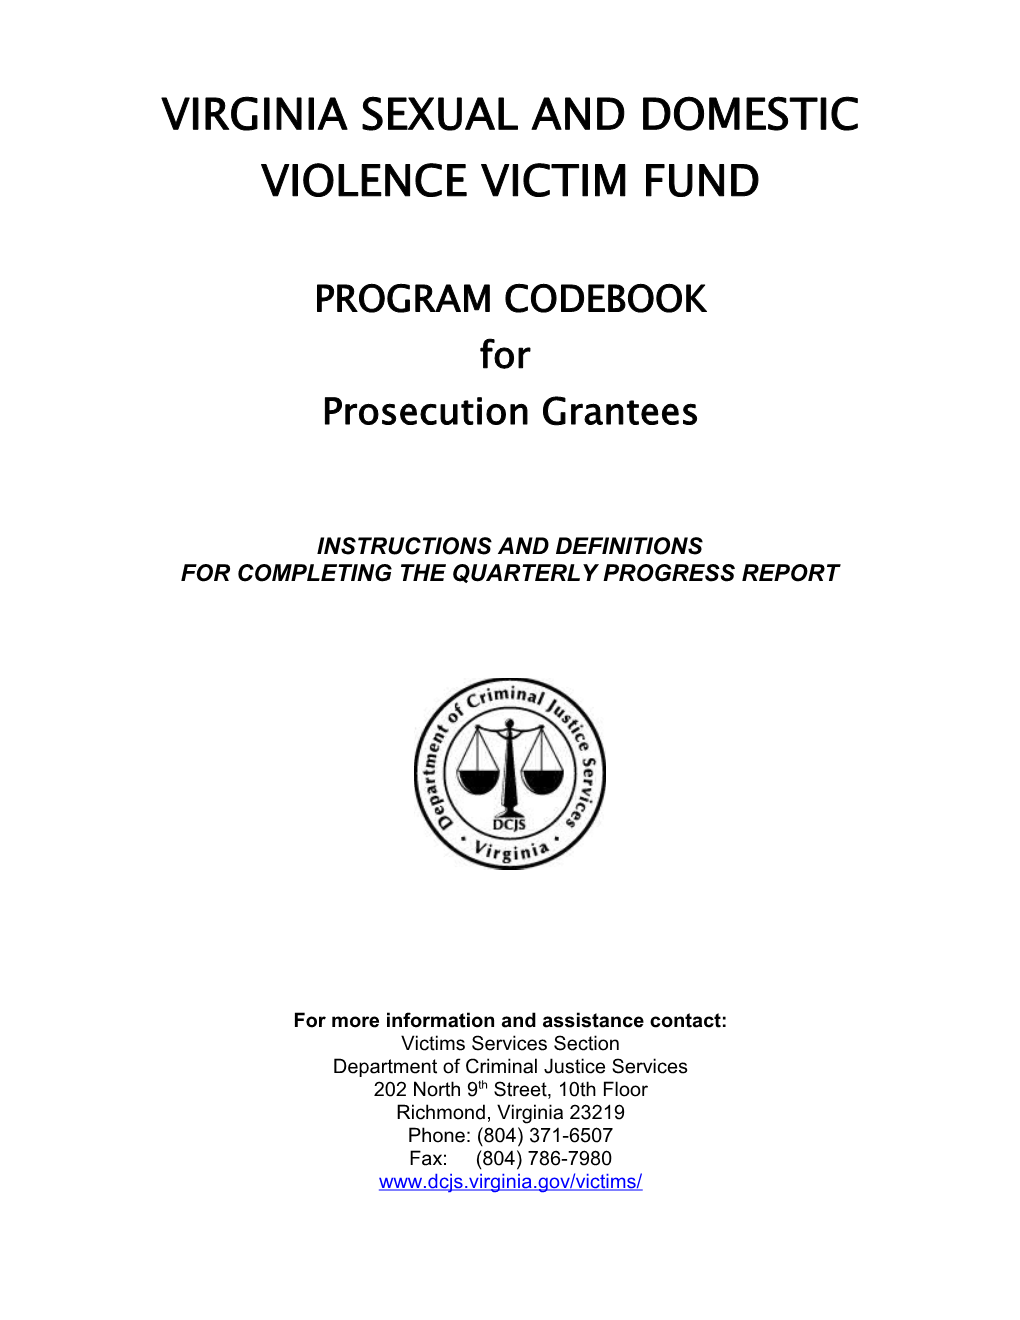 Virginia Sexual and Domestic Violence Victim Fund